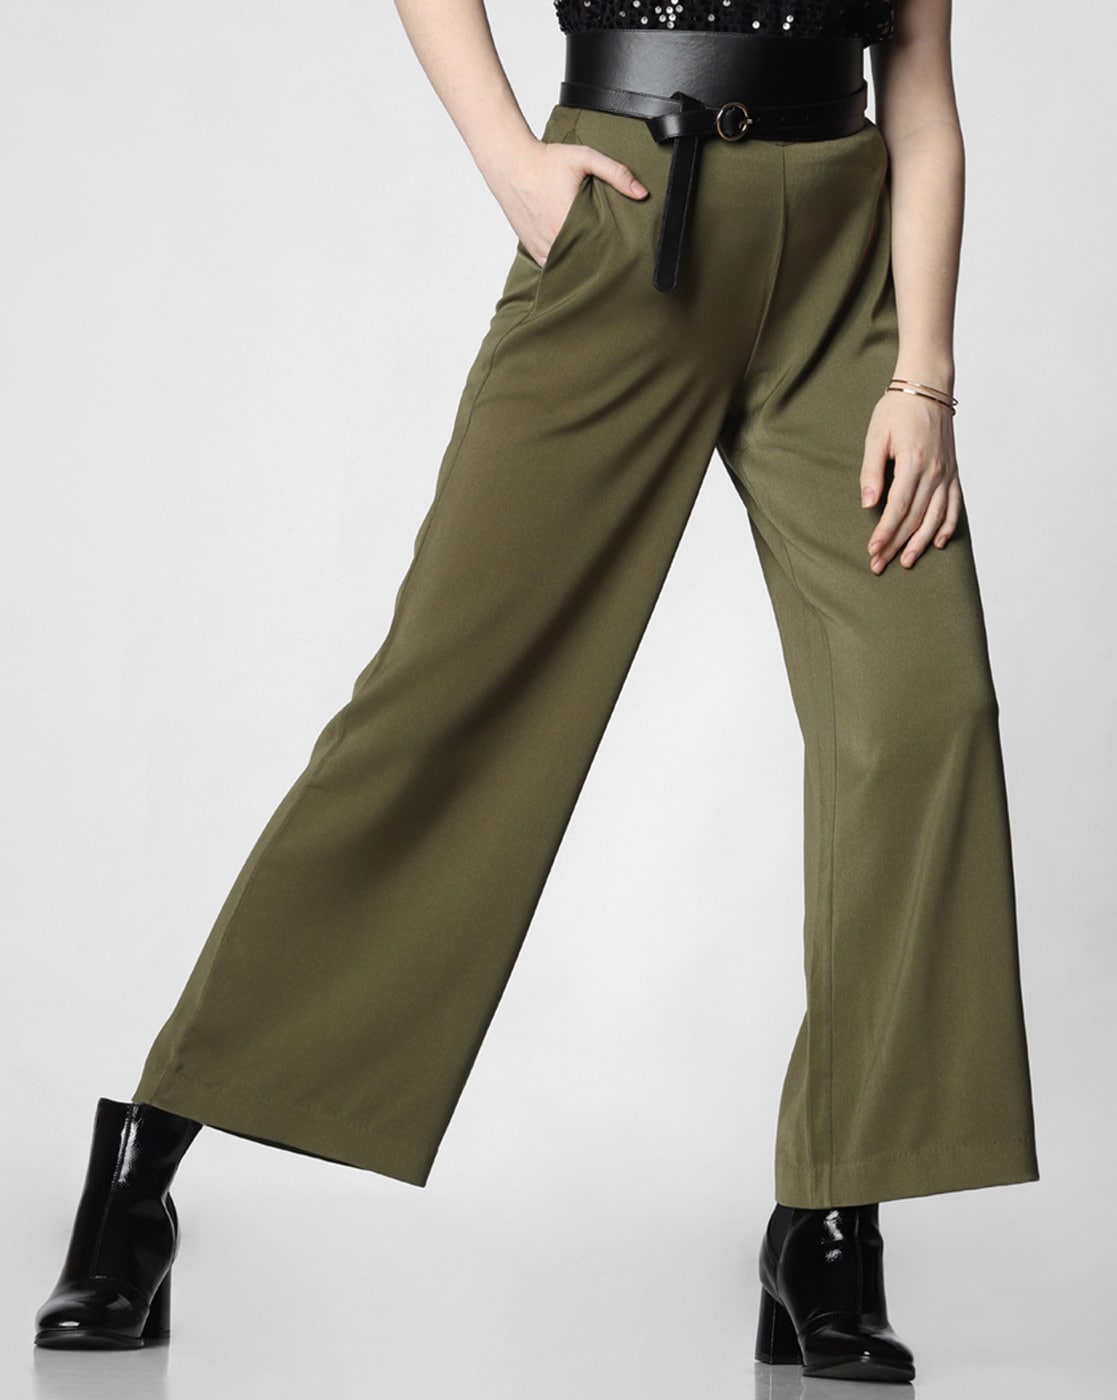 Green Palazzo Pants Outfit Top Sellers, 57% OFF | www.resortrybnicek.cz